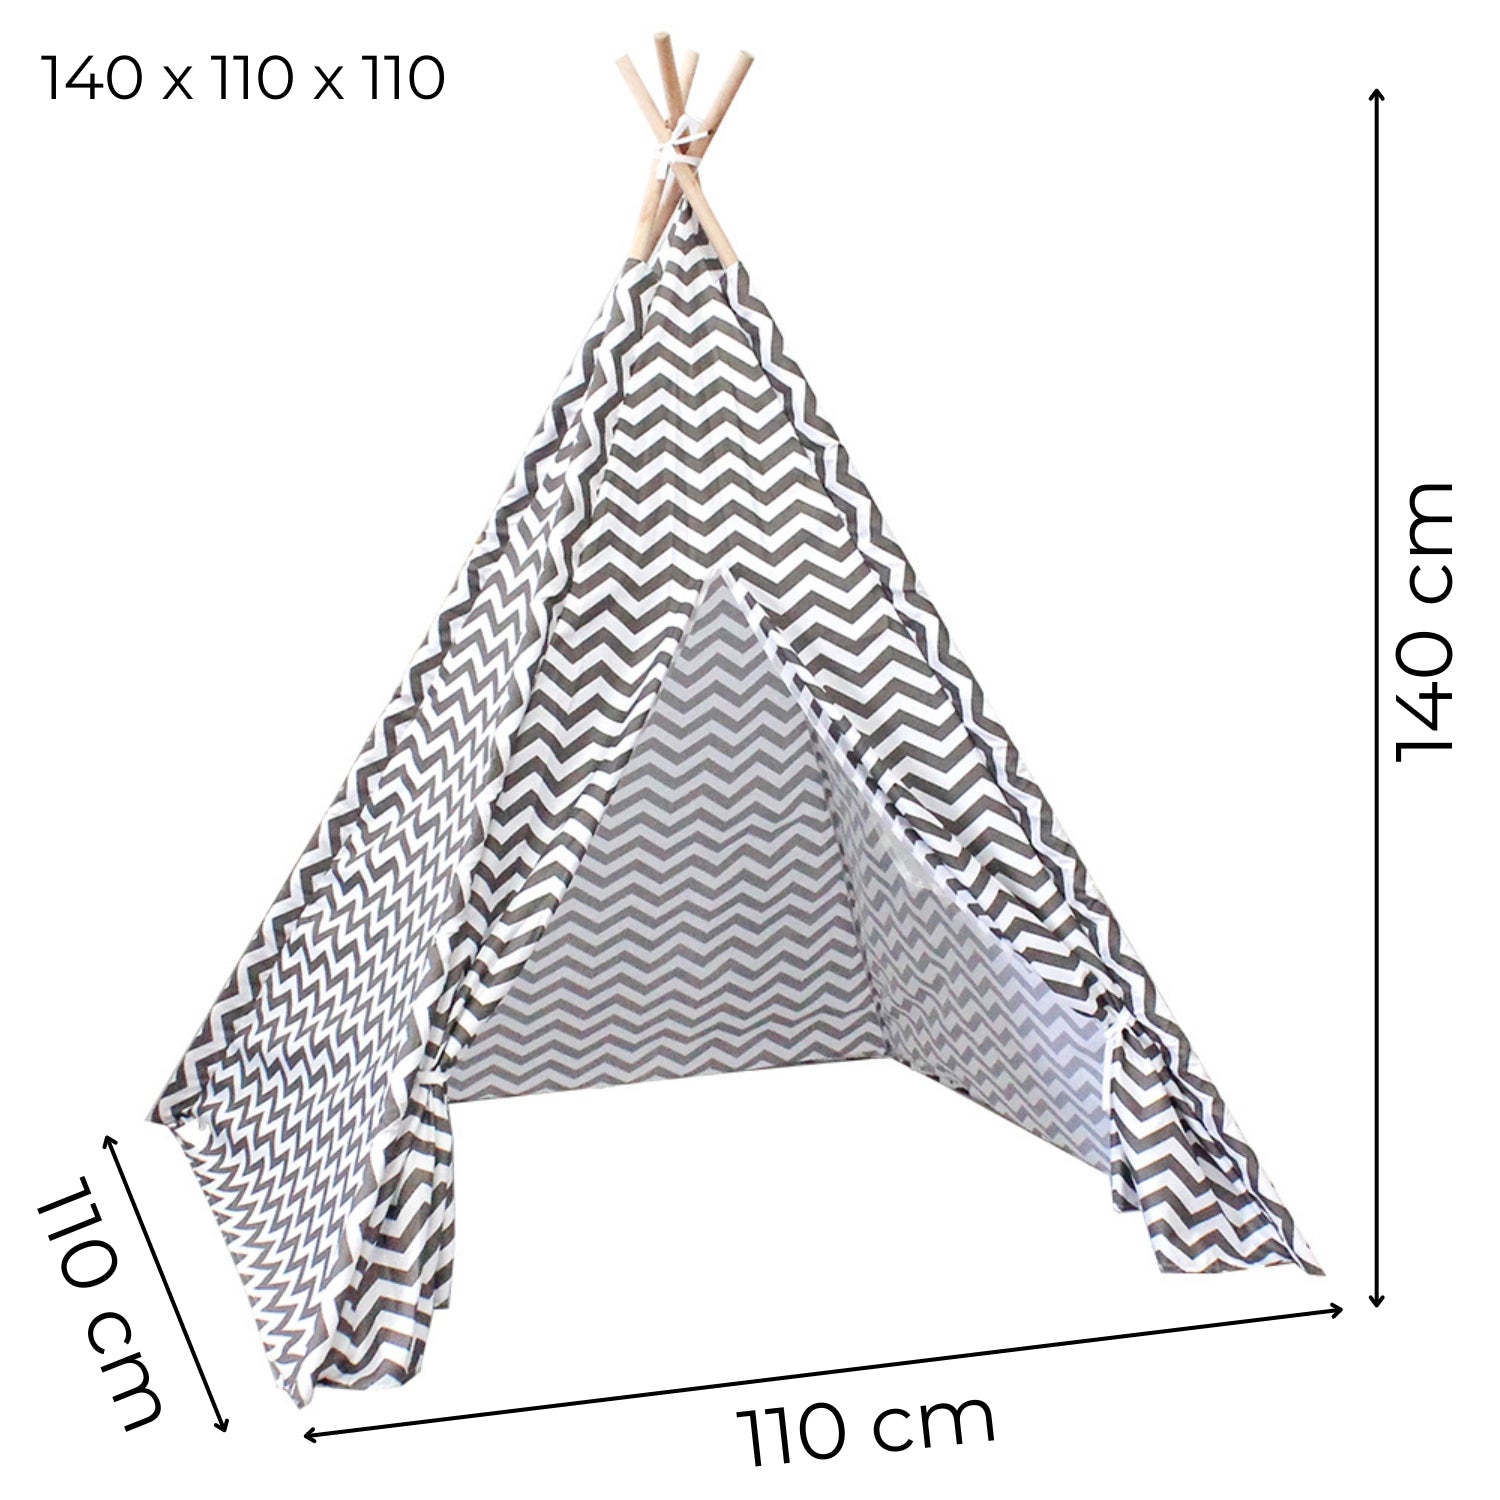 GOMINIMO Kids Teepee Tent with Side Window and Carry Case (Wave Stripe)